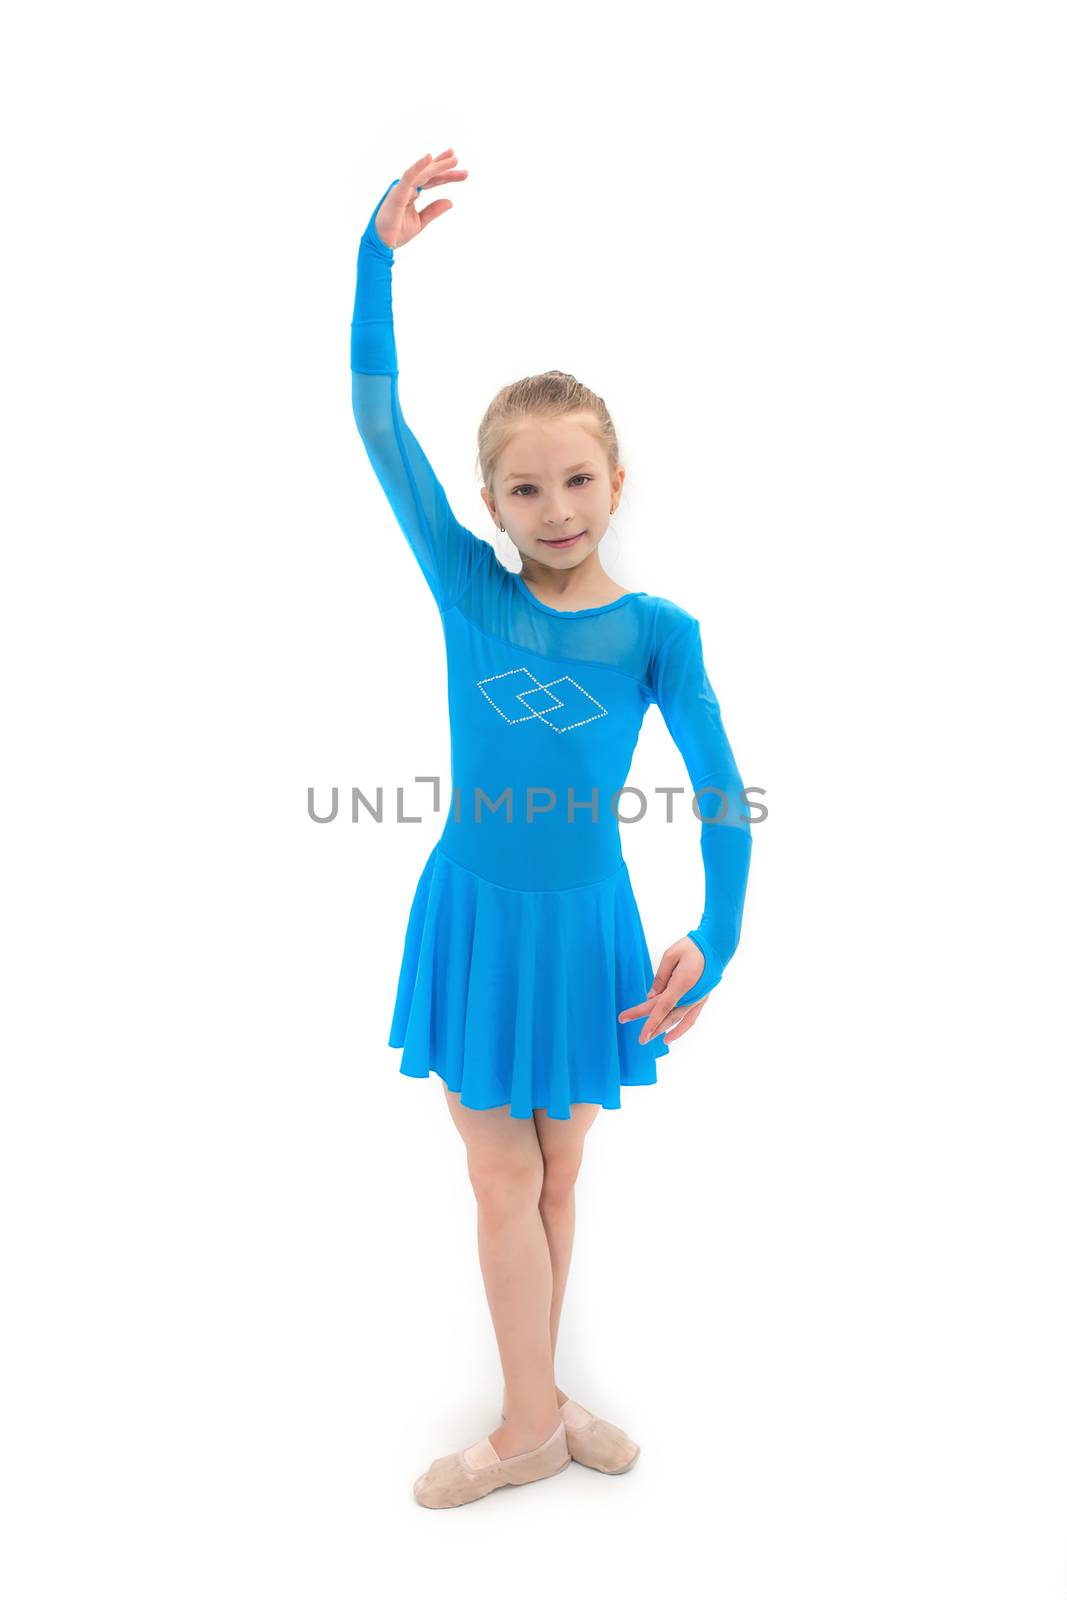 Little girl as dancer, studio shot on white background by Angel_a